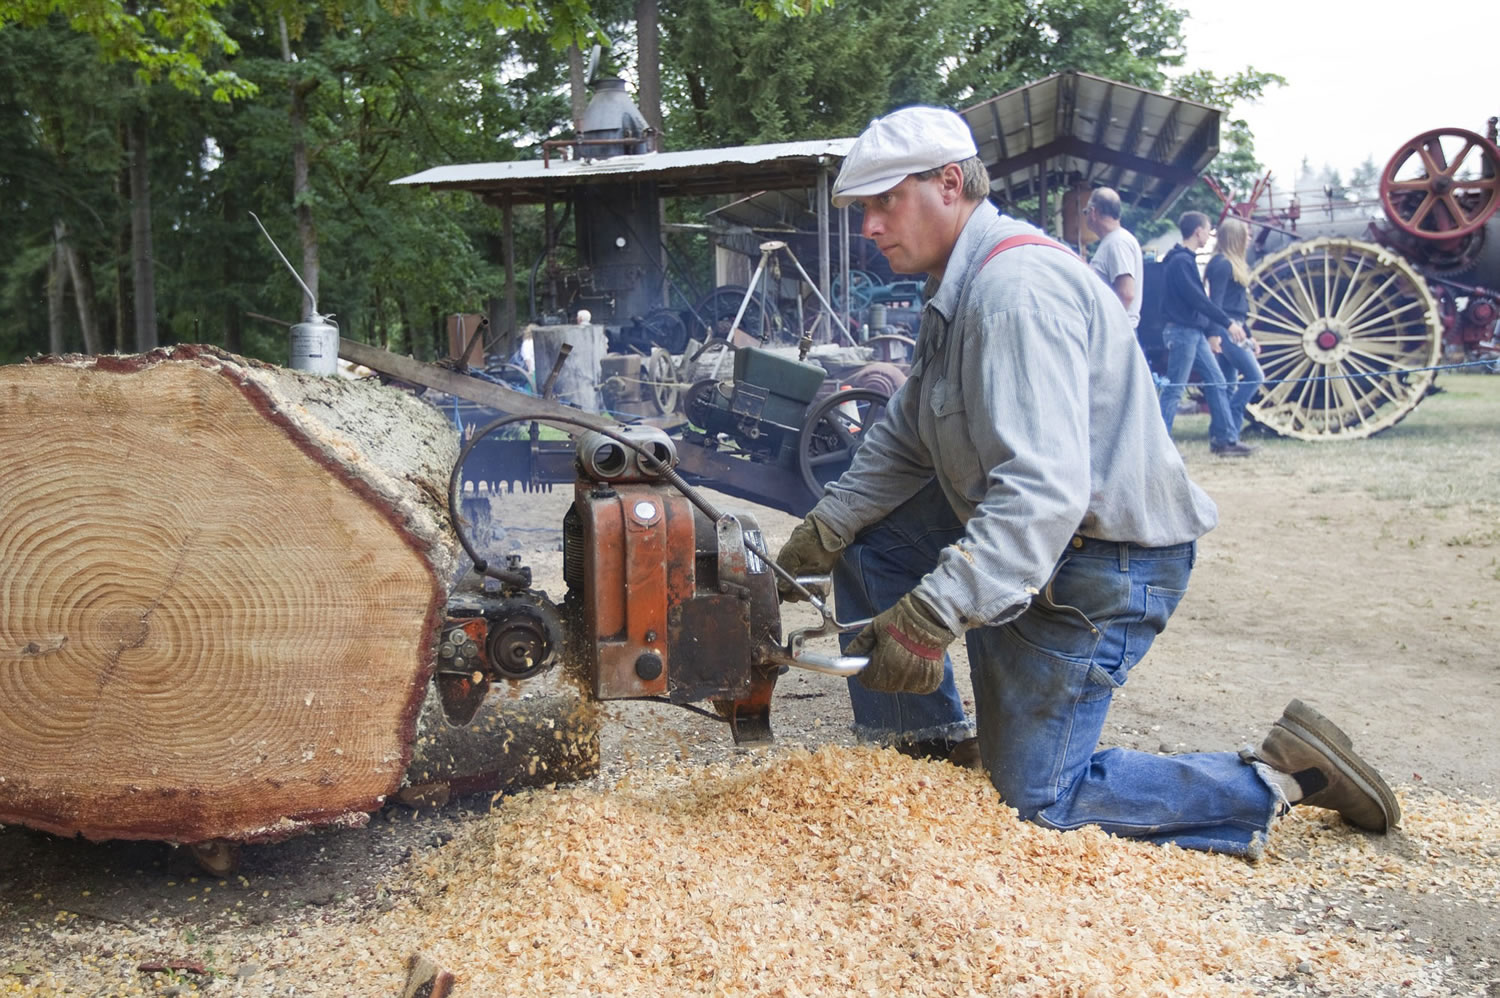 Charlie Davis uses a 1947 Mercury chainsaw at the Rural Heritage Fair in Ridgefield, Sunday July 20, 2014.  The event hosted by the Fort Vancouver Antique Equipment Association, showcases the tools used in Clark County during the 19th and 20th centuries.